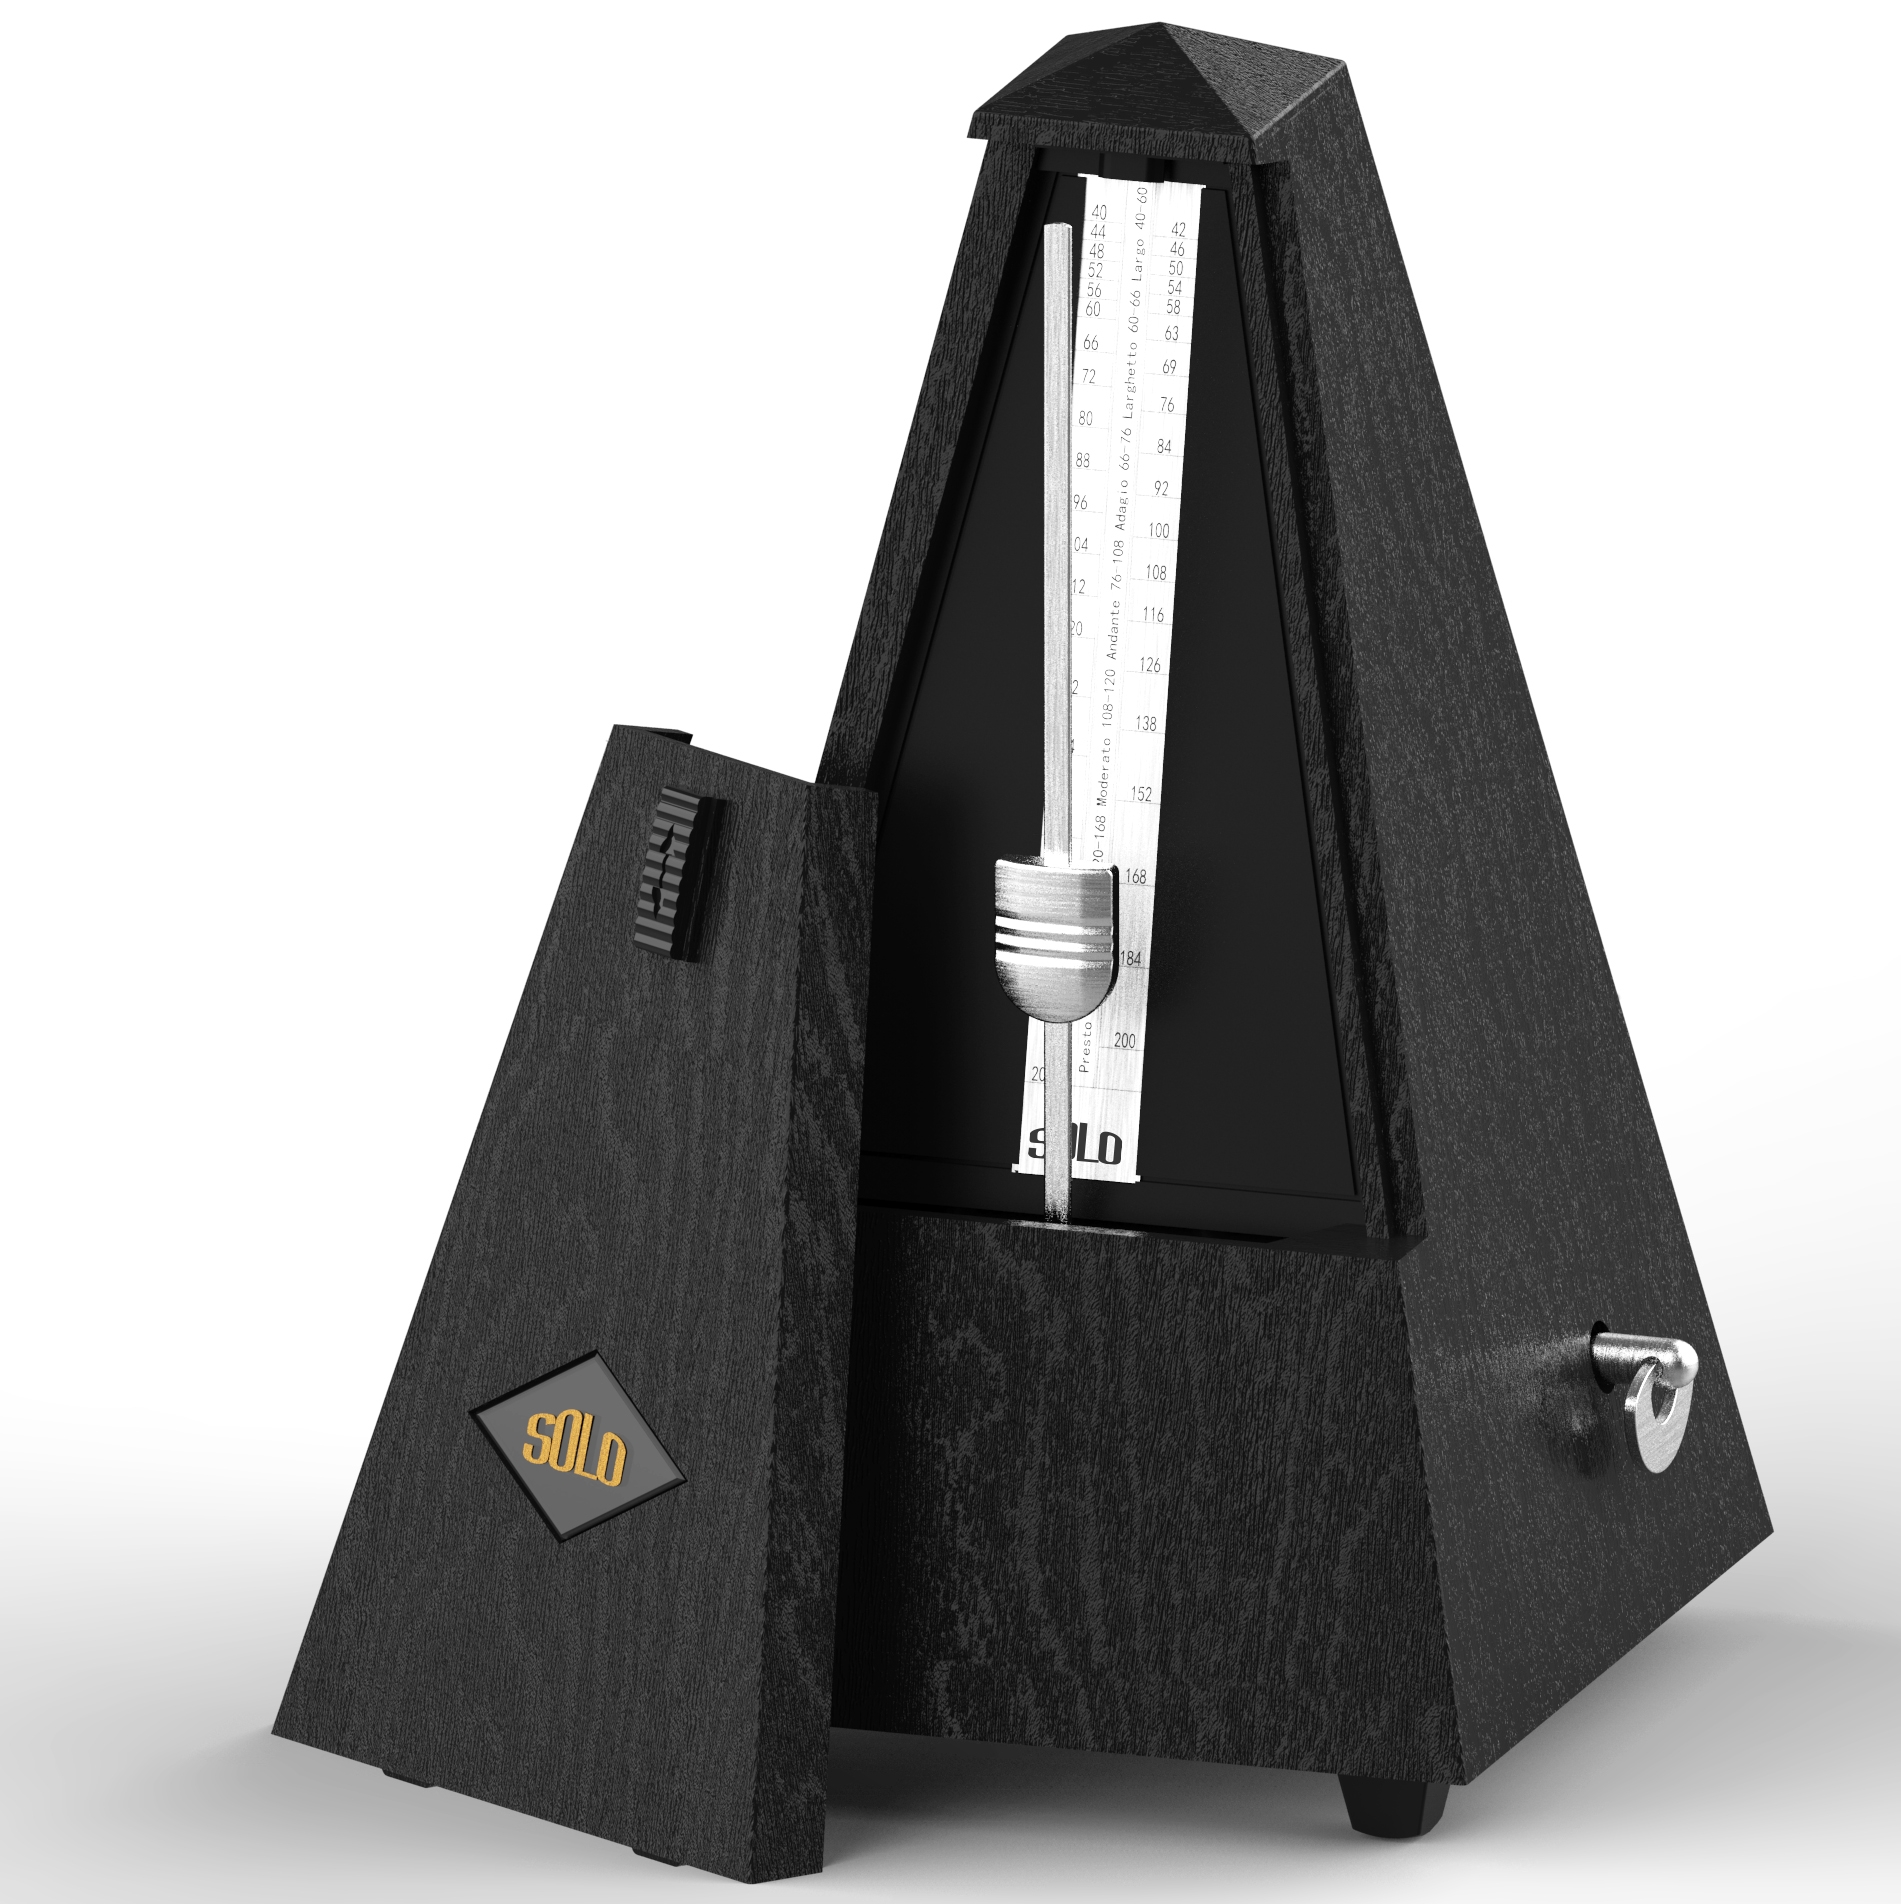 SOLO Tower Type Guitar Metronome Bell Ring Rhythm Mechanical Pendulum Metronome for Guitar Bass Piano Violin Accessories